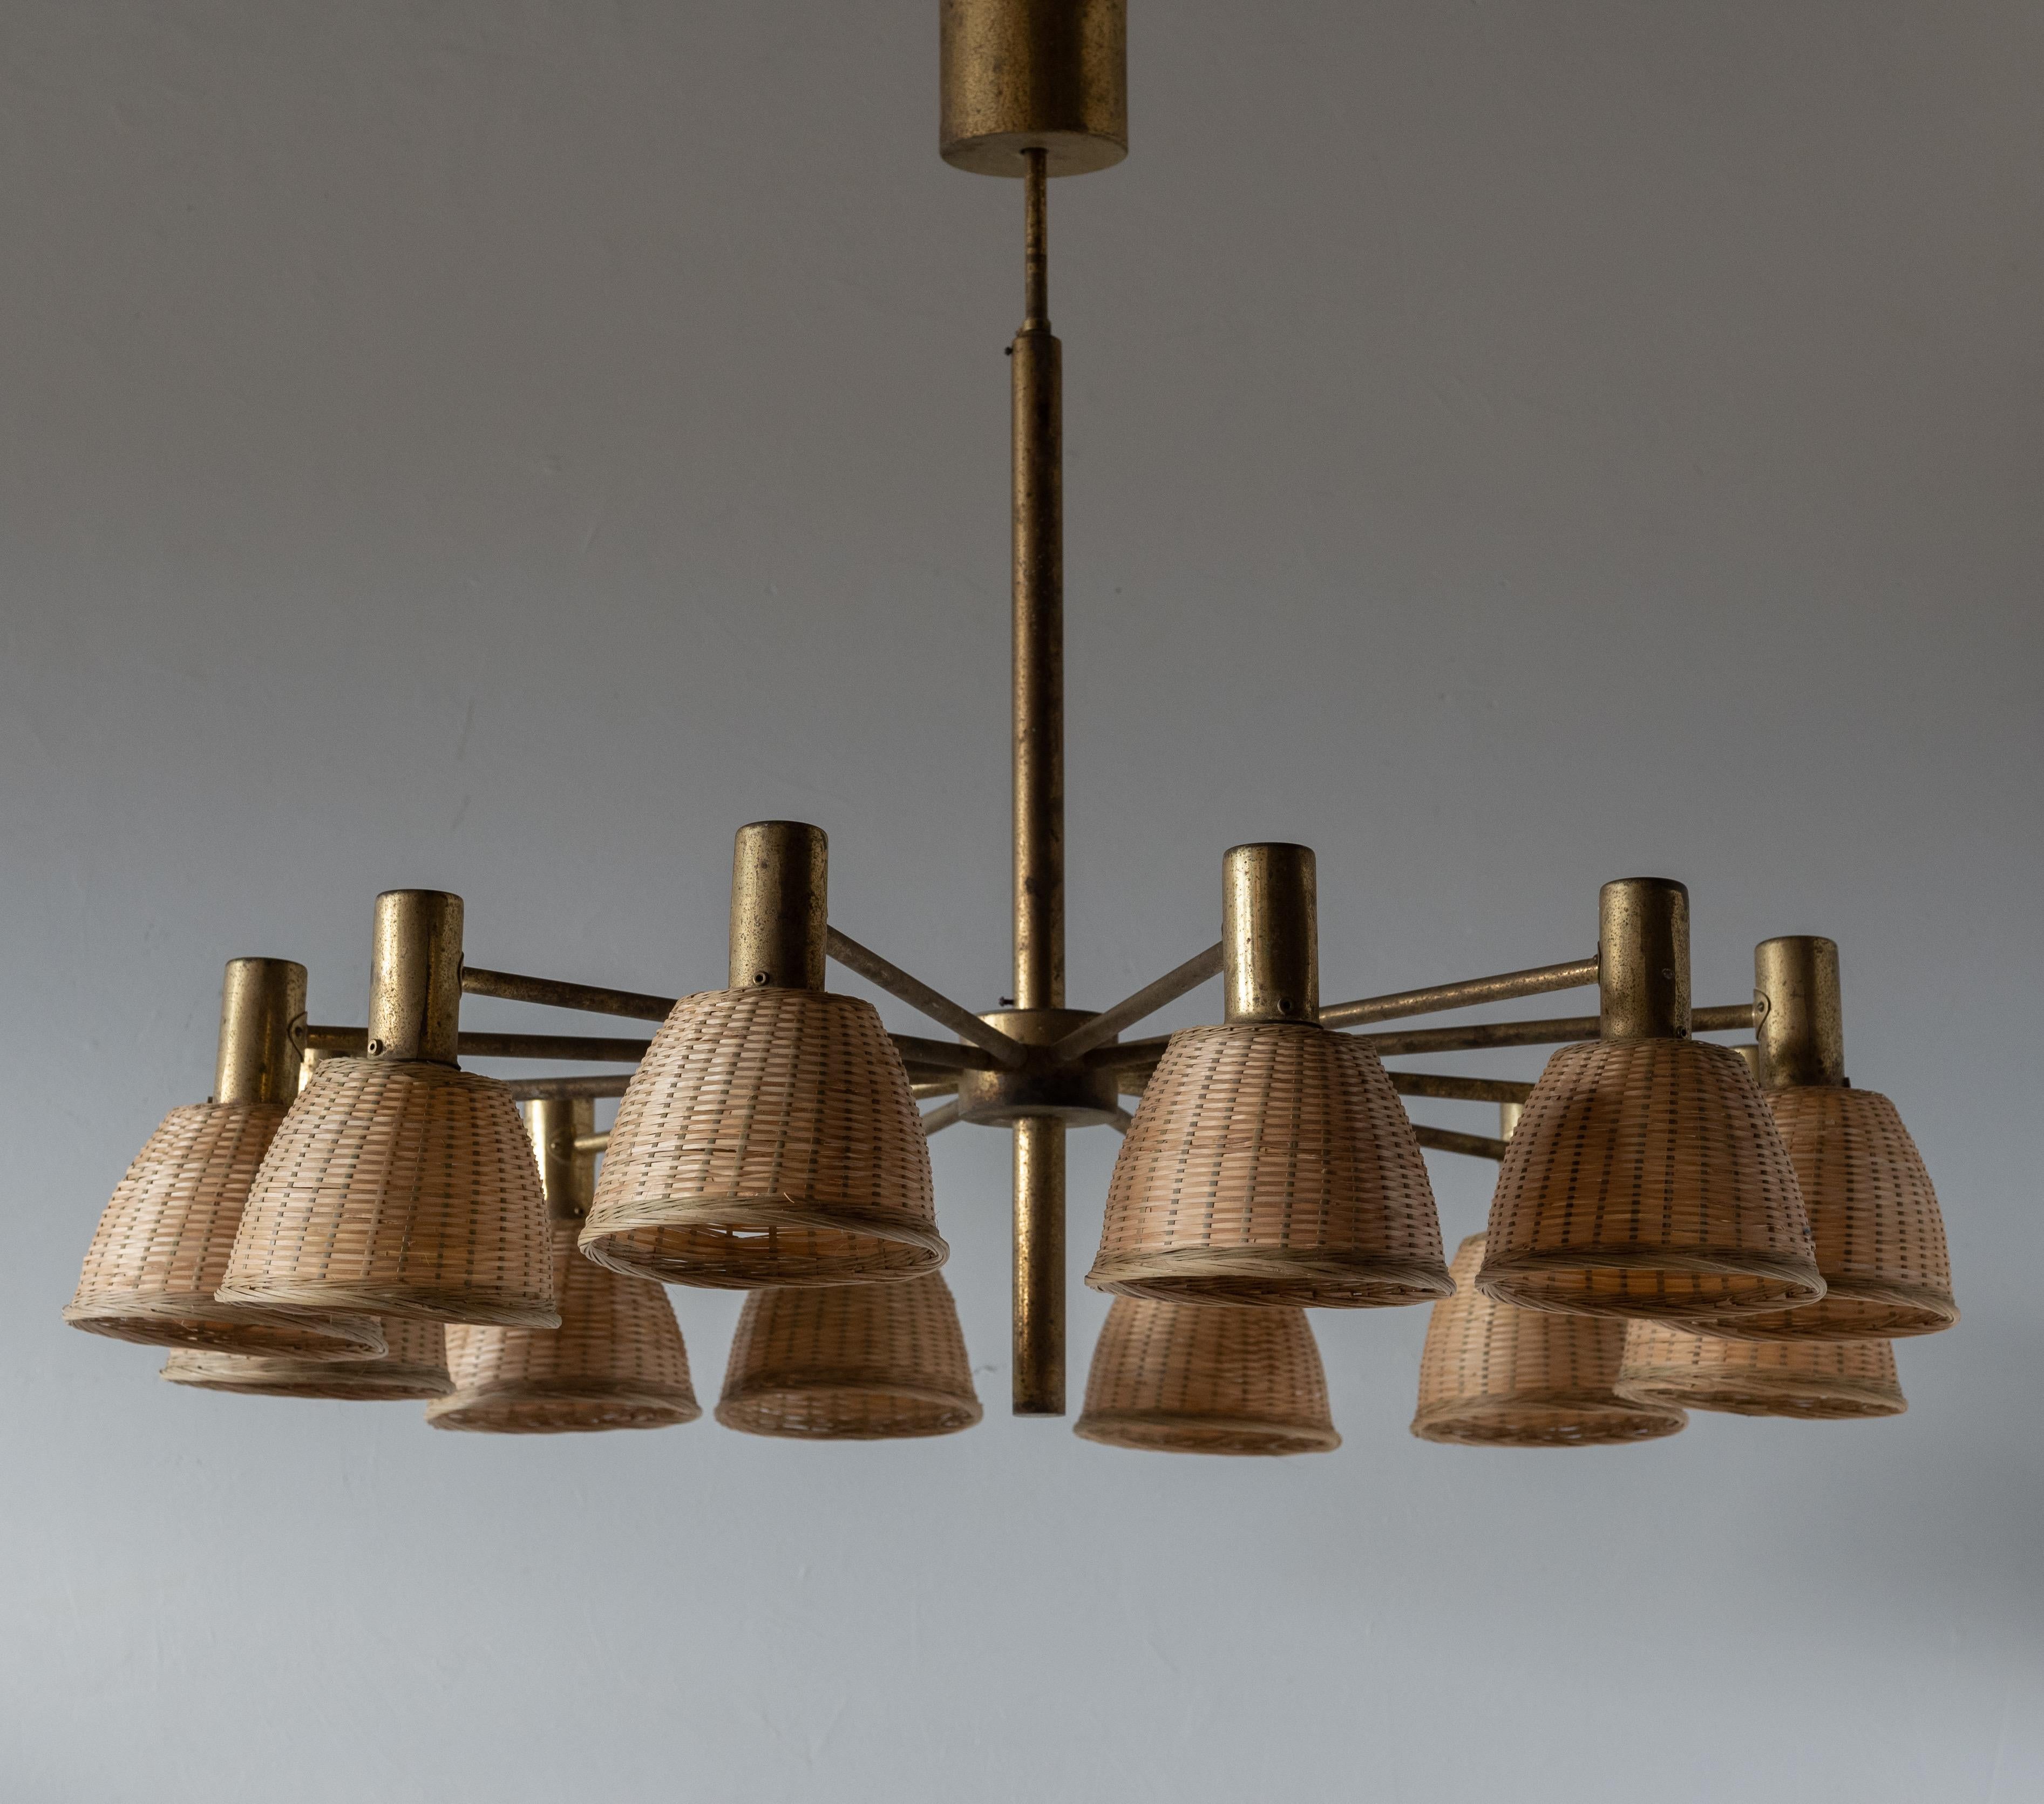 A sizable 12-armed chandelier, designed by Hans-Agne Jakobsson for his own firm in Markaryd, Sweden. c. 1960s. Features brass and assorted vintage rattan lampshades. Likely originally mounted with glass lampshades.

Presents with beautiful and